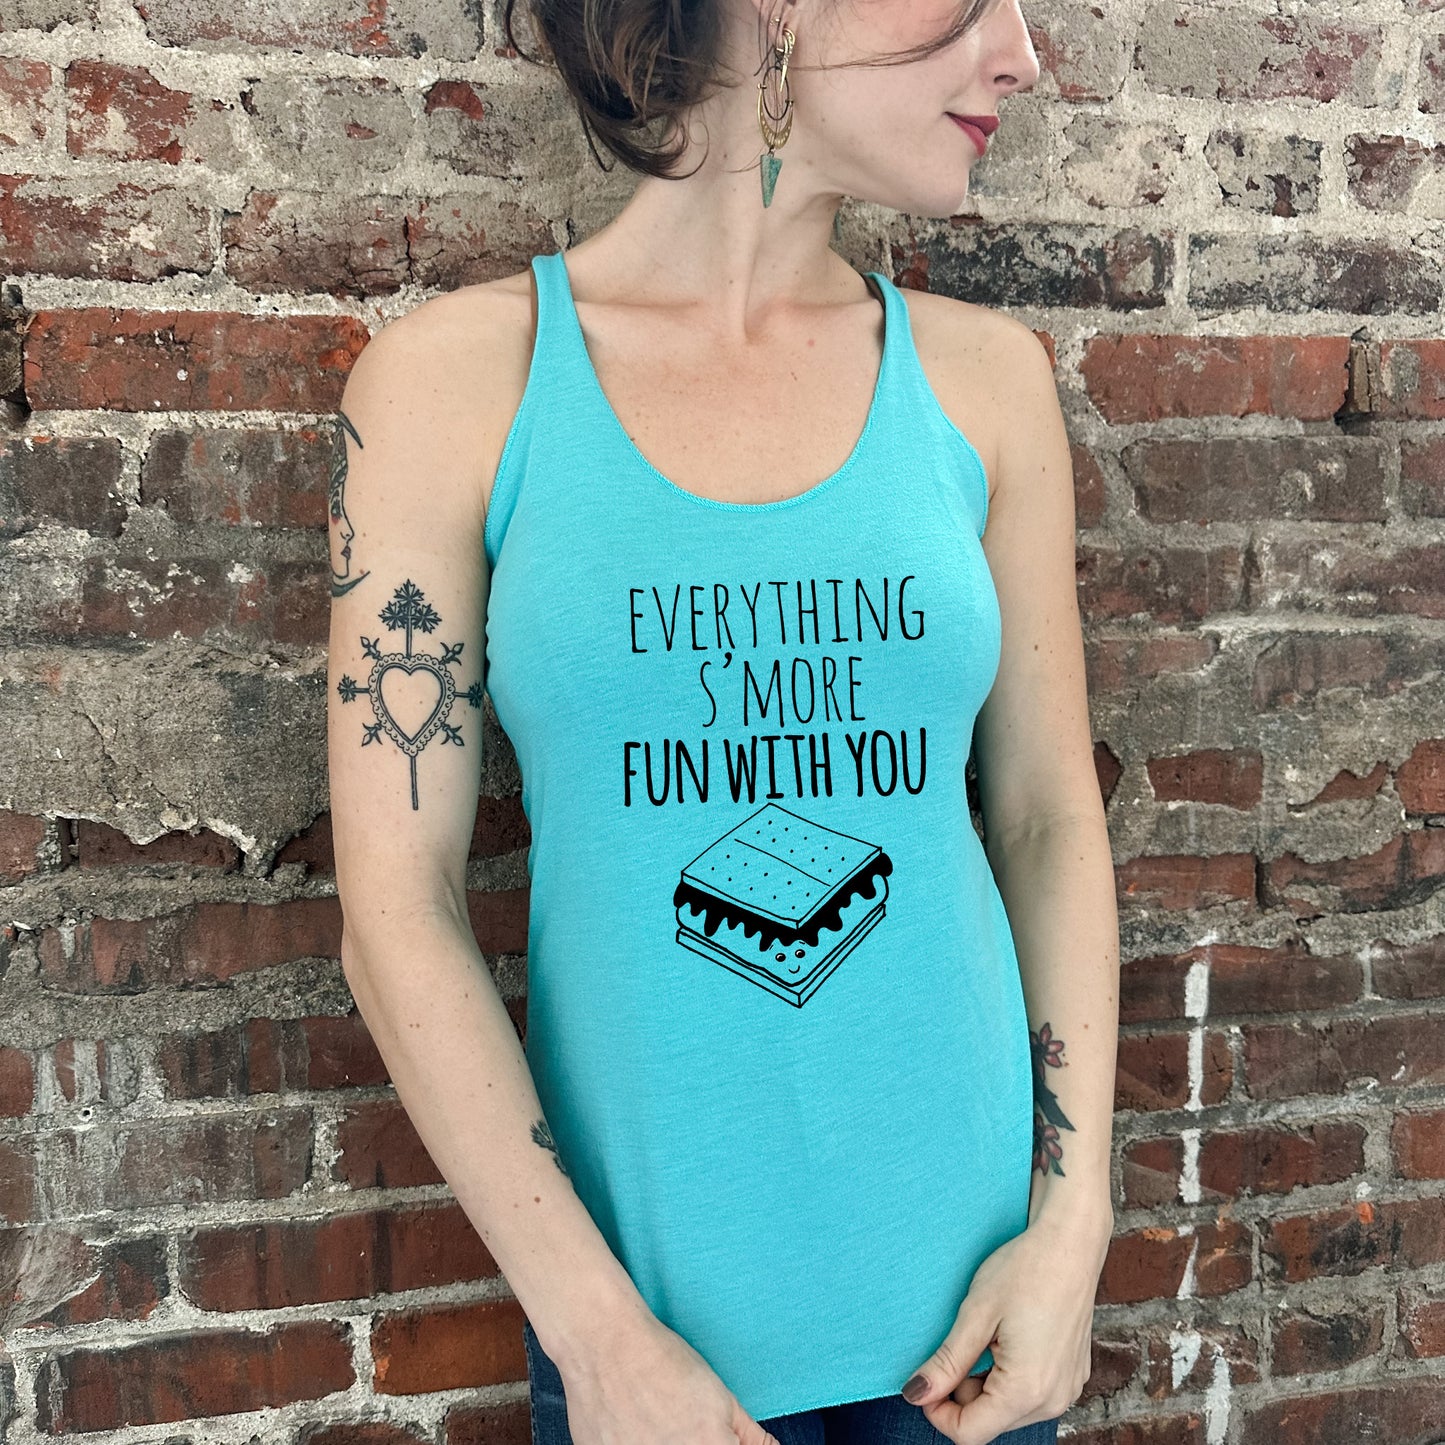 Everything S'more Fun With You - Women's Tank - Heather Gray, Tahiti, or Envy